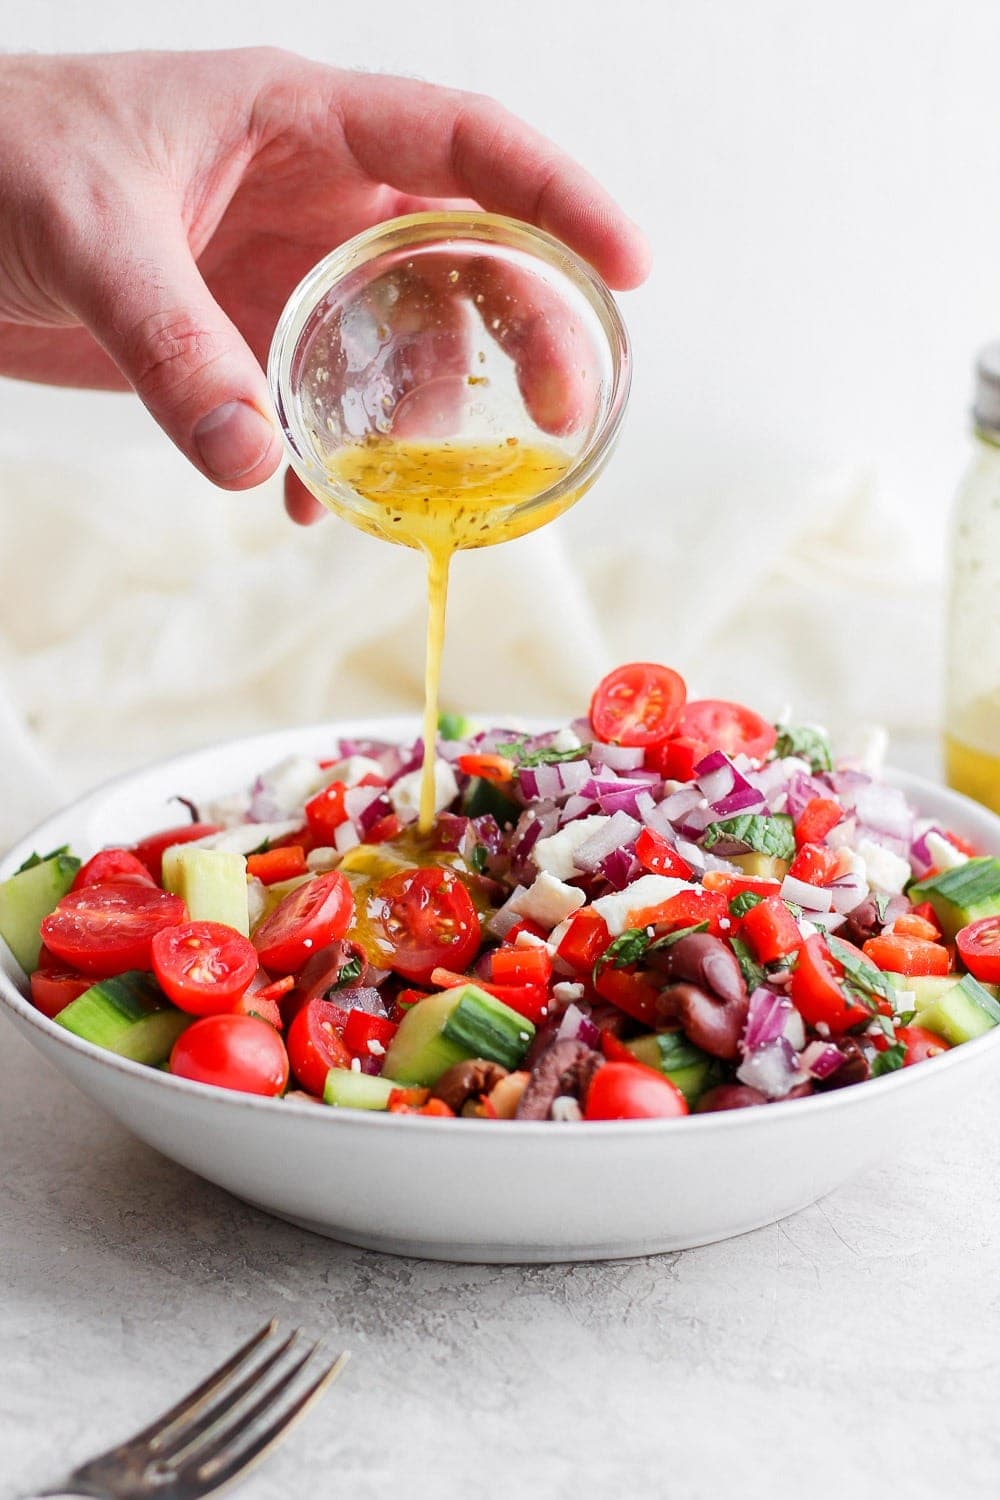 Pouring dressing onto the Greek Salad